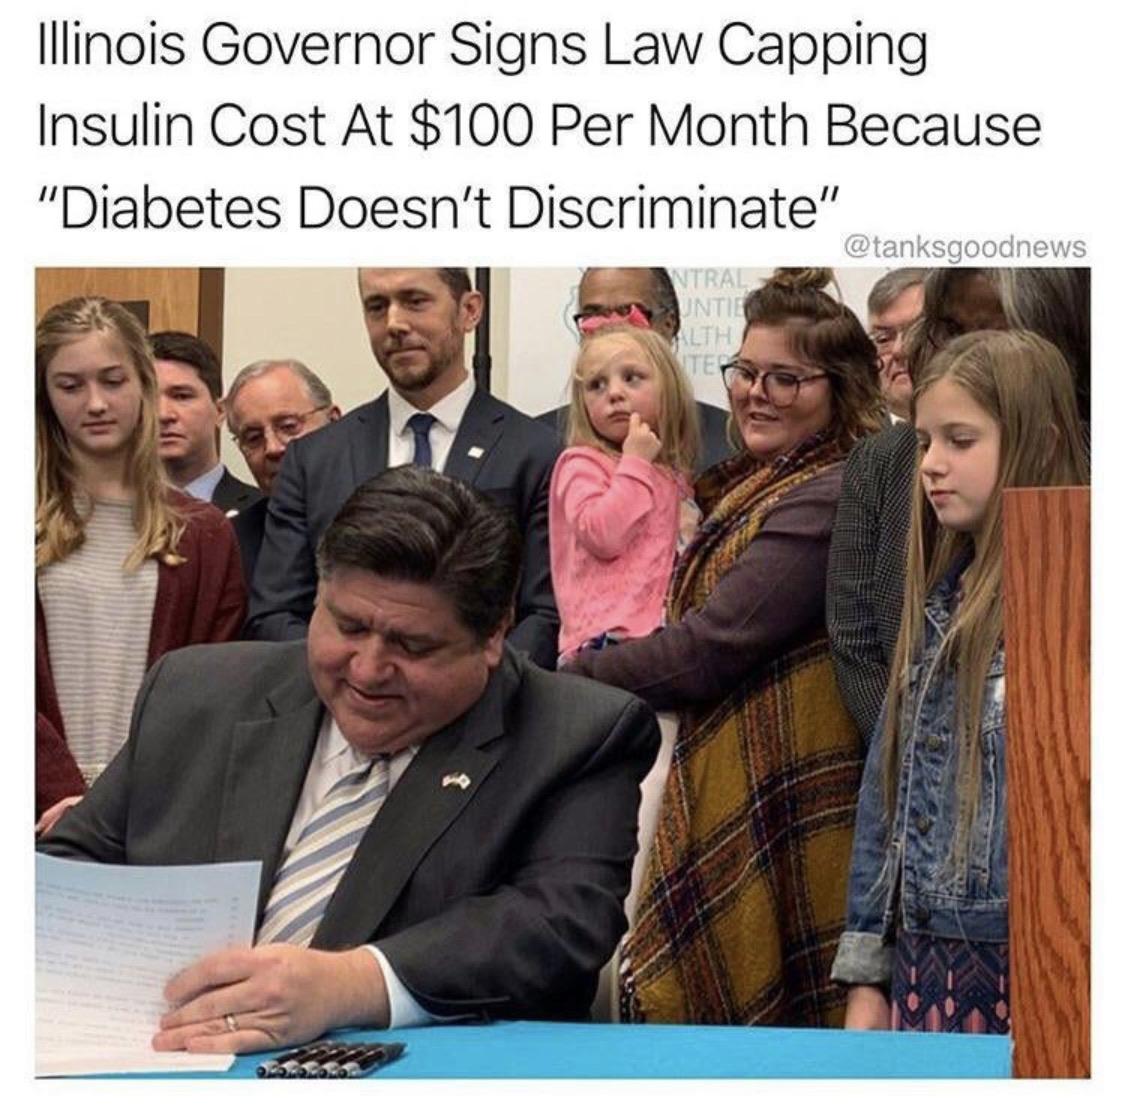 illinois governor signs bill capping insulin costs - Illinois Governor Signs Law Capping Insulin Cost At $100 Per Month Because "Diabetes Doesn't Discriminate" Uinti